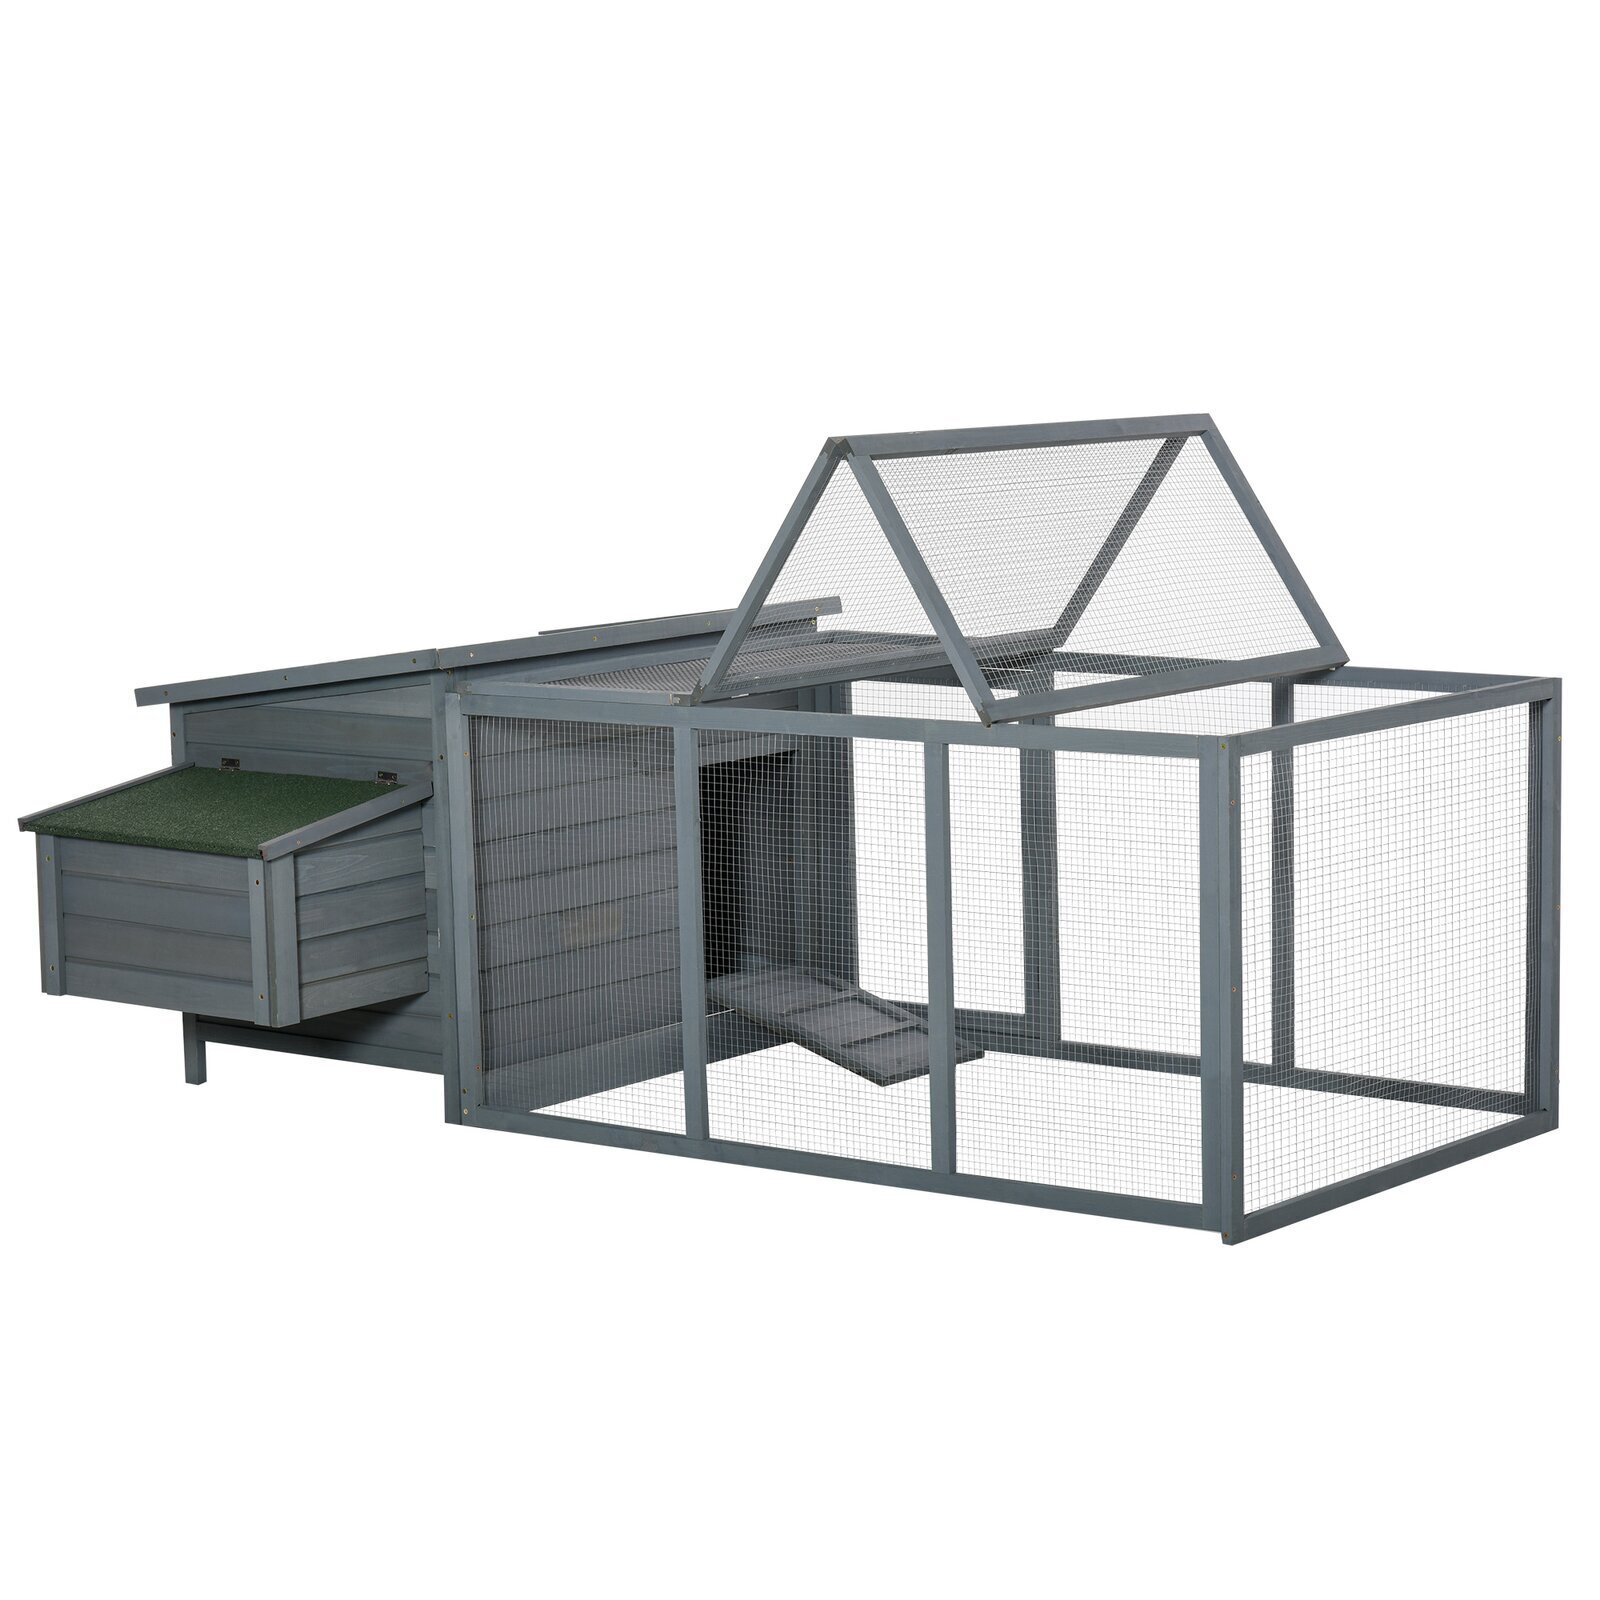 One Level Large Chicken Coop With Run